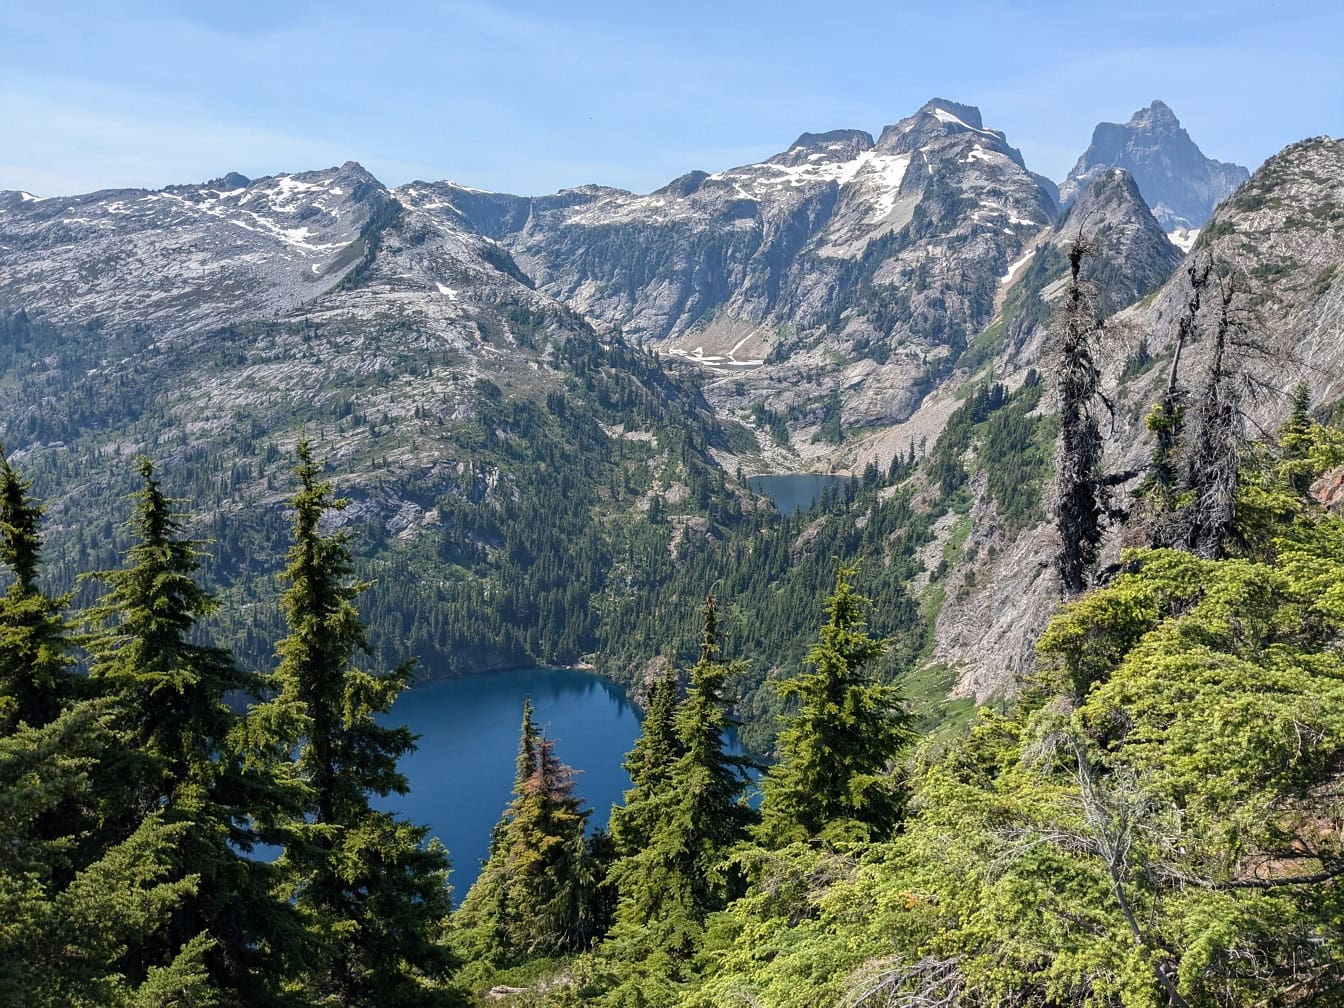 Lakeside of Thornton lakes in North Cascades national park in Washington in United Stated of America